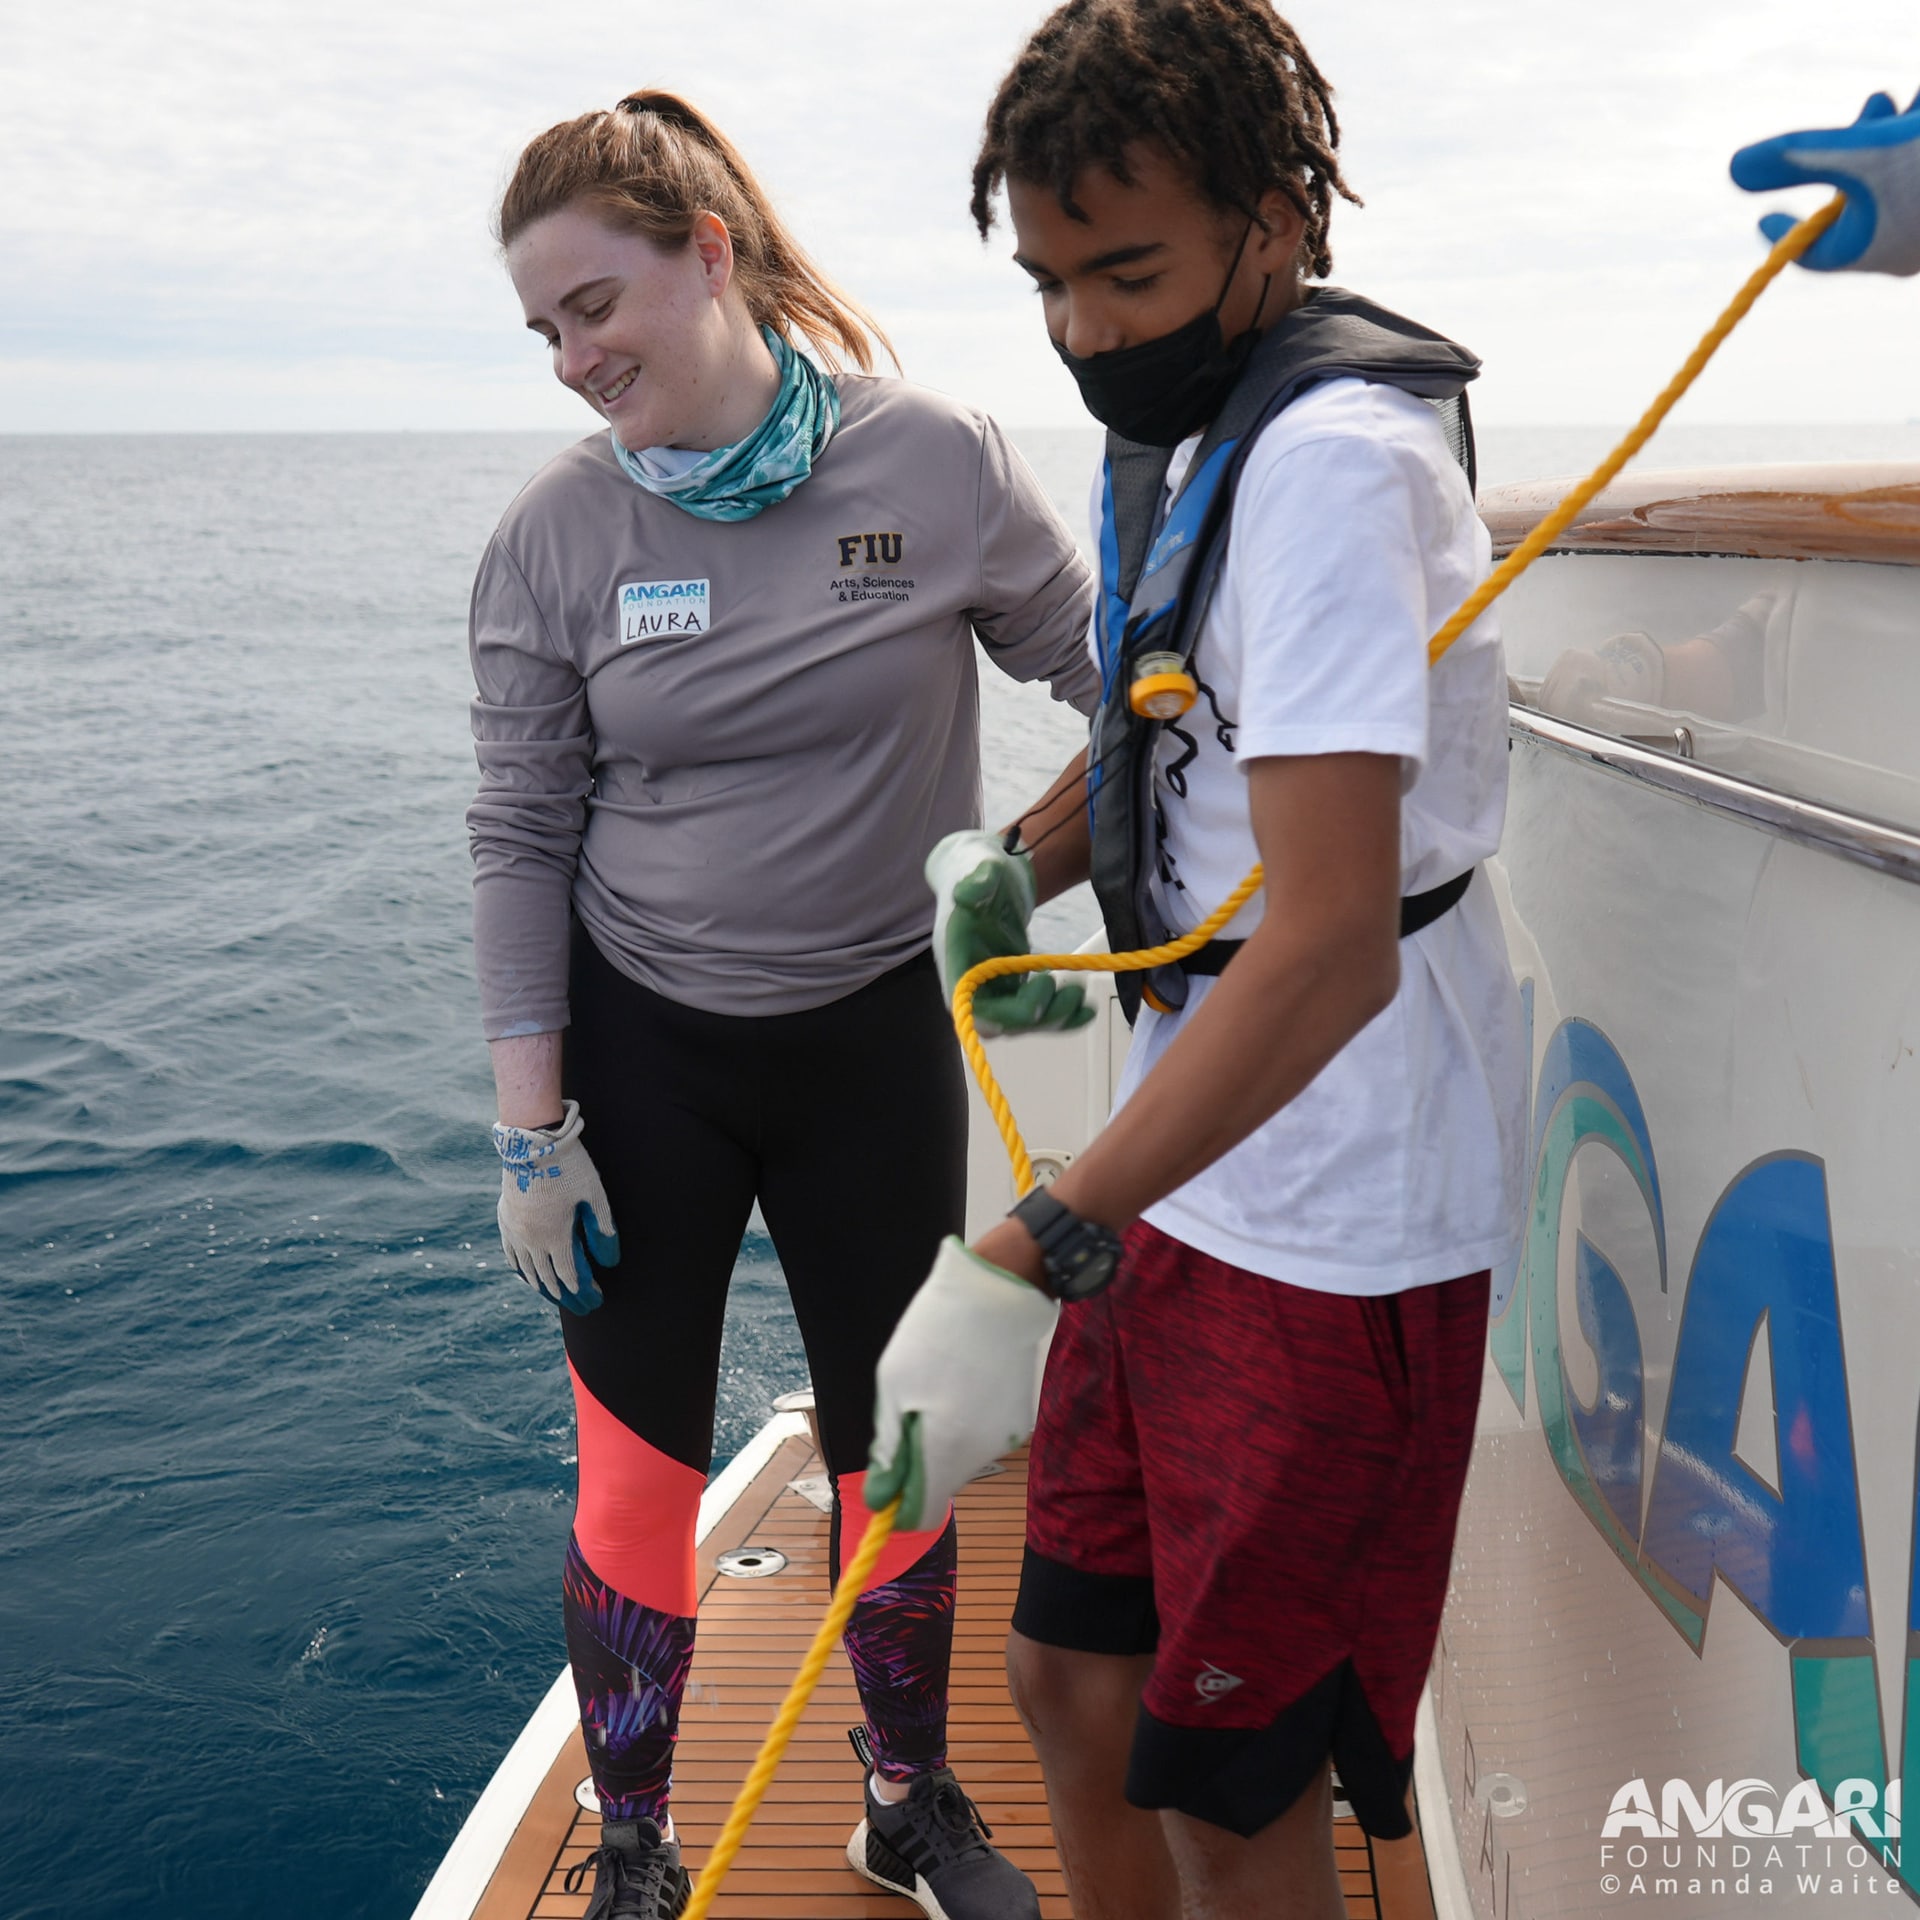 As Chief Scientist for Coastal Ocean Explorers: Sharks, I get to teach students about shark research methods! PC: Amanda Waite